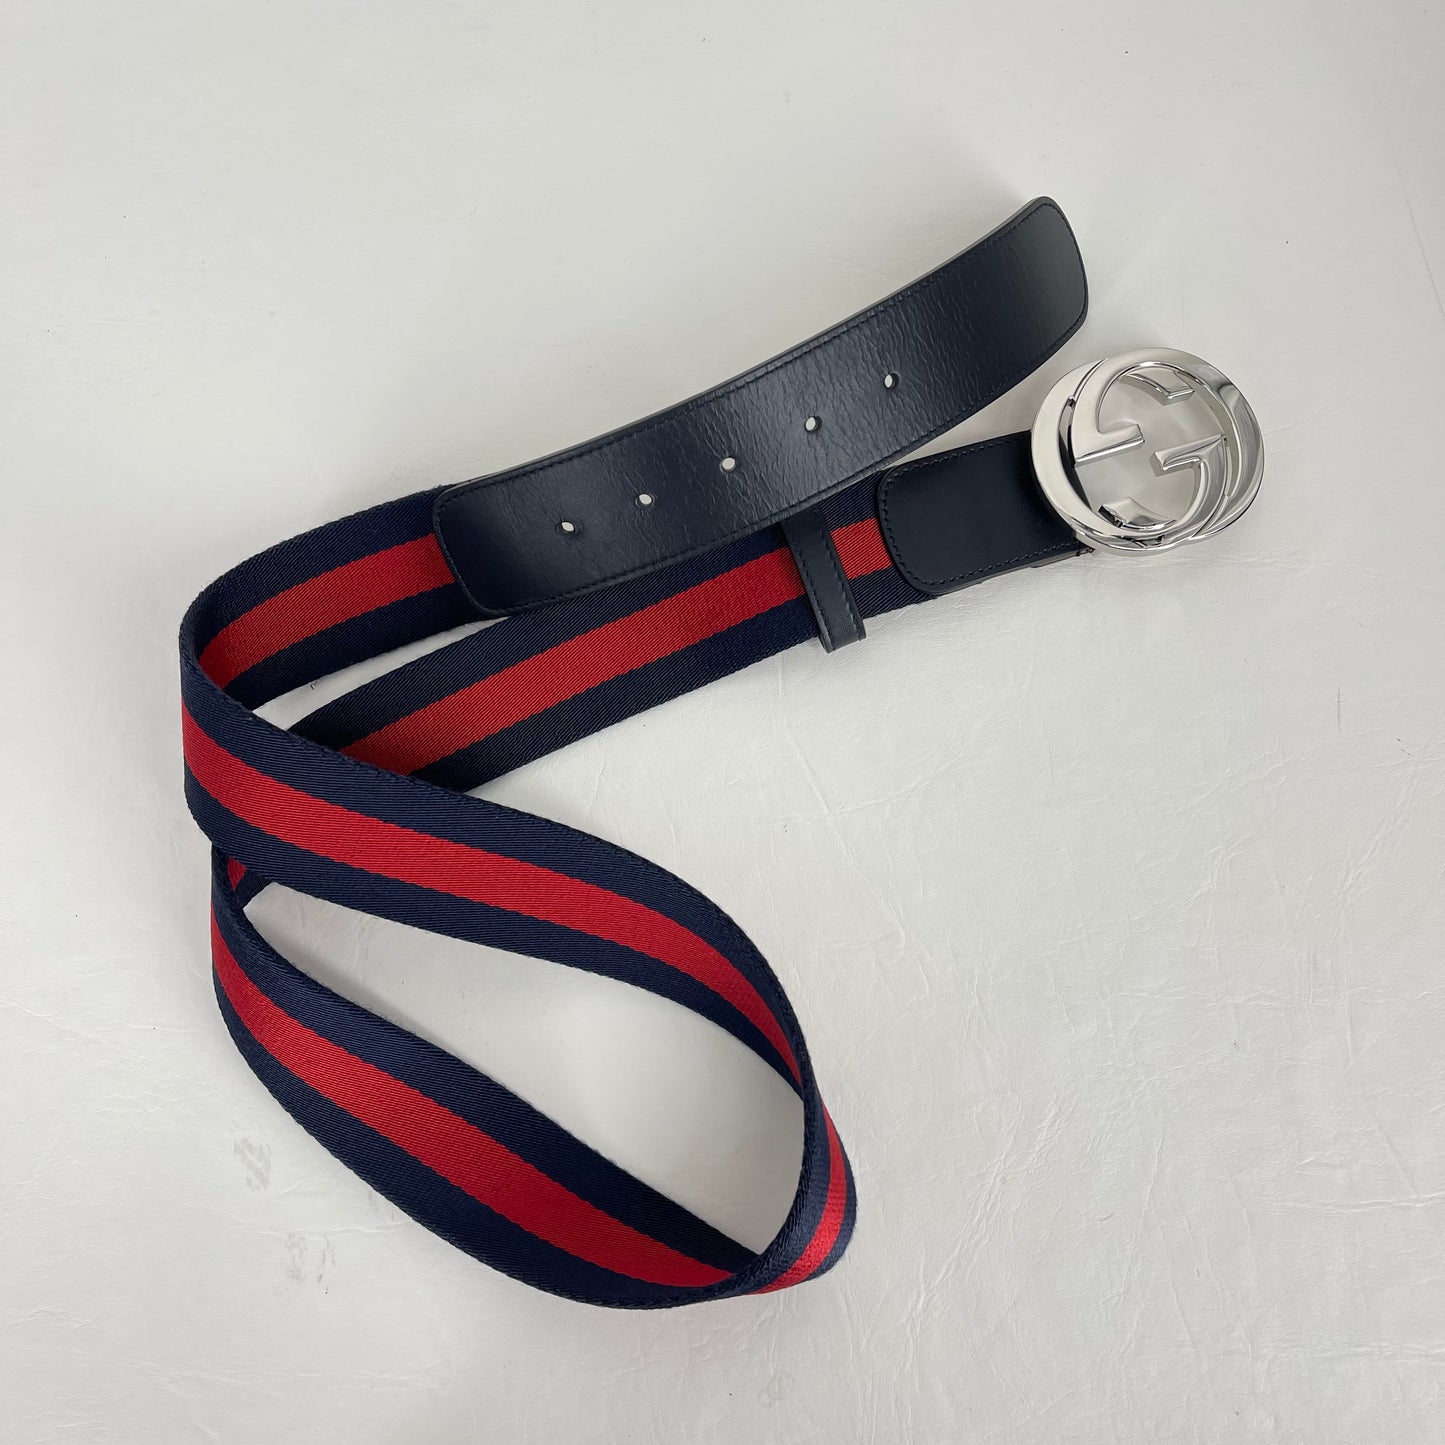 Authentic Gucci Red and Blue Web Belt